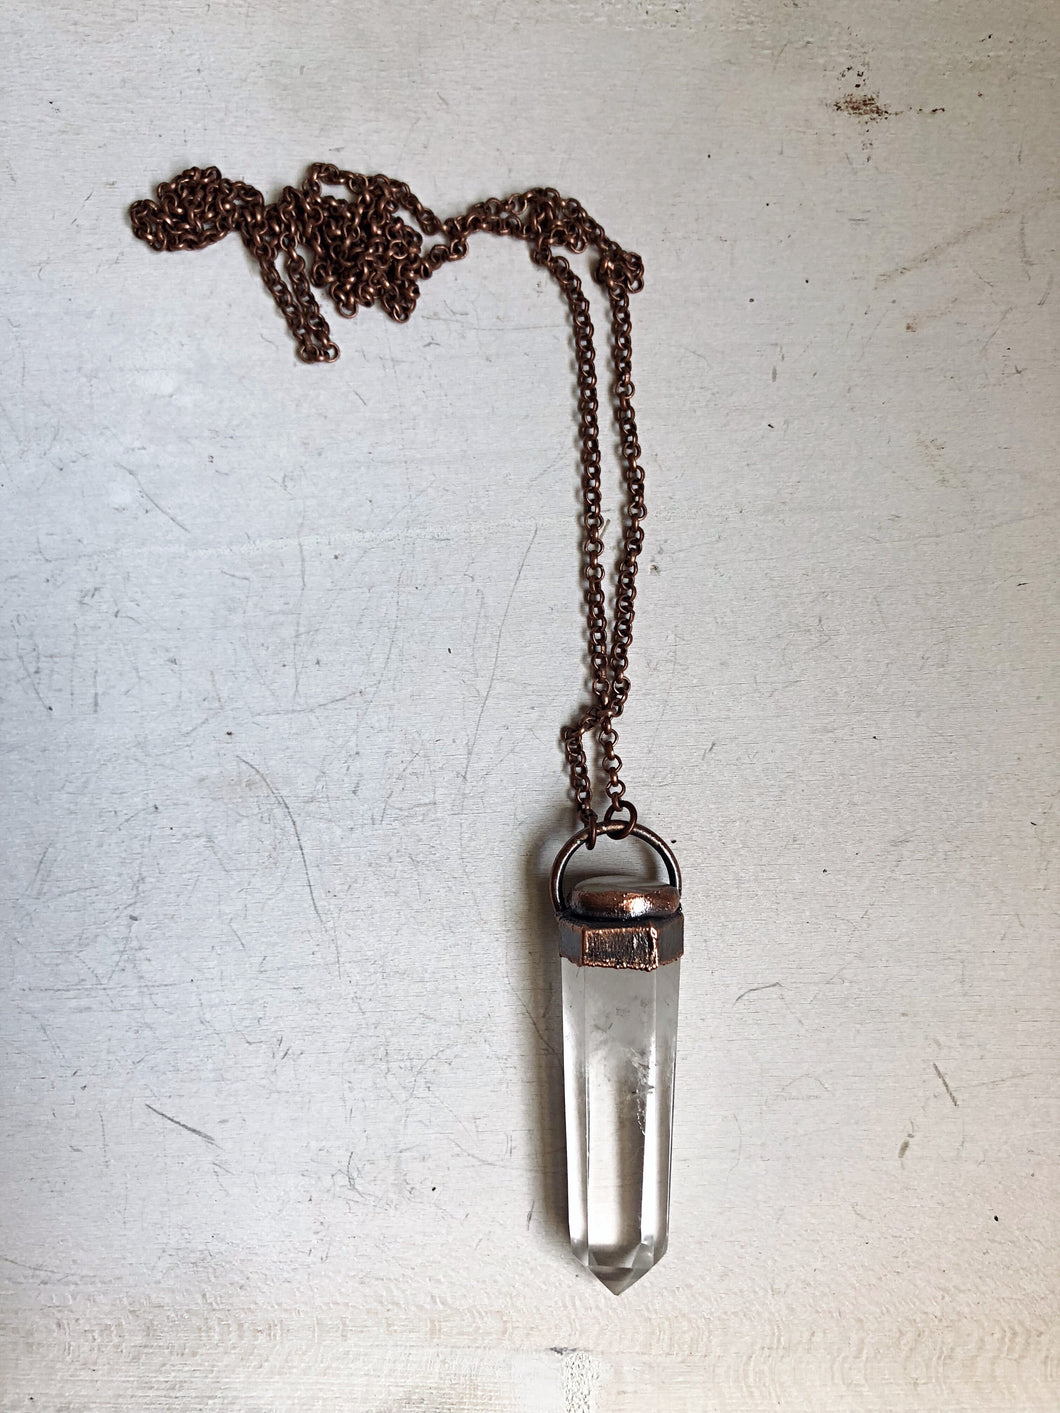 Polished Clear Quartz Point & Golden Rutilated Quartz Topped Necklace #1 (Icarus Soaring)